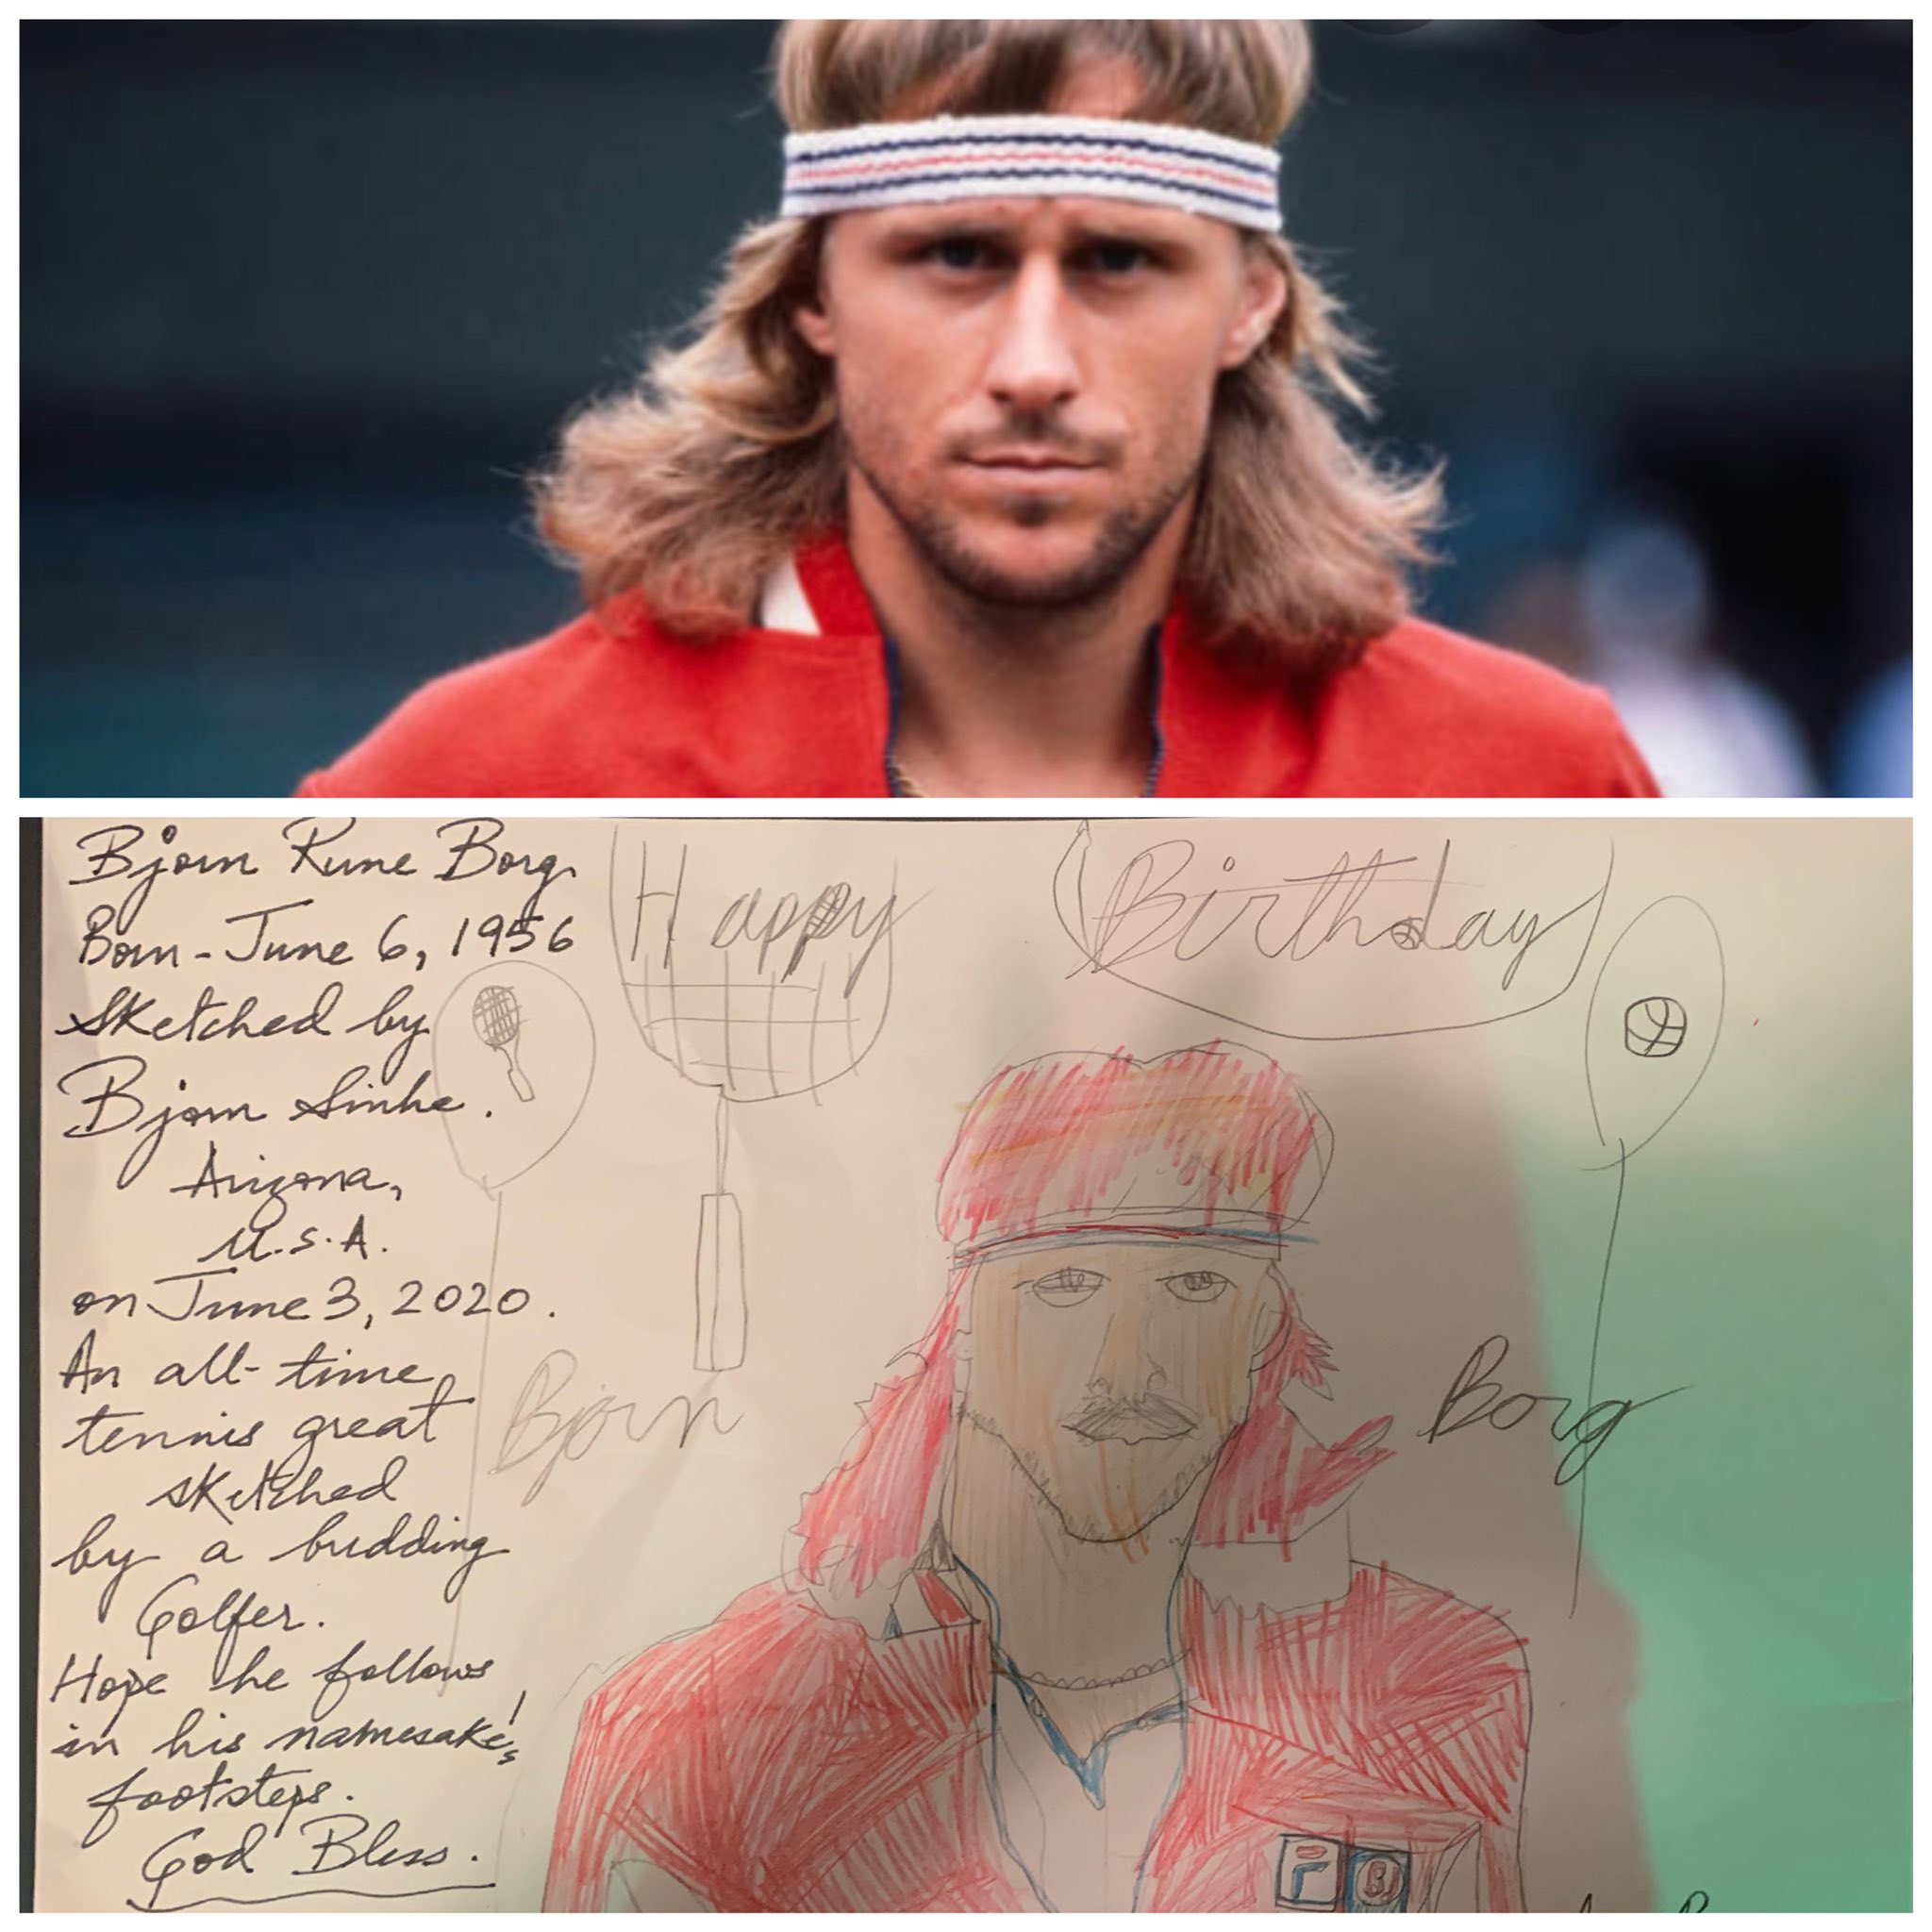  A very Happy Birthday Bjorn Borg. Here s my son Bjorn s sketch for you on your 64th birthday. 